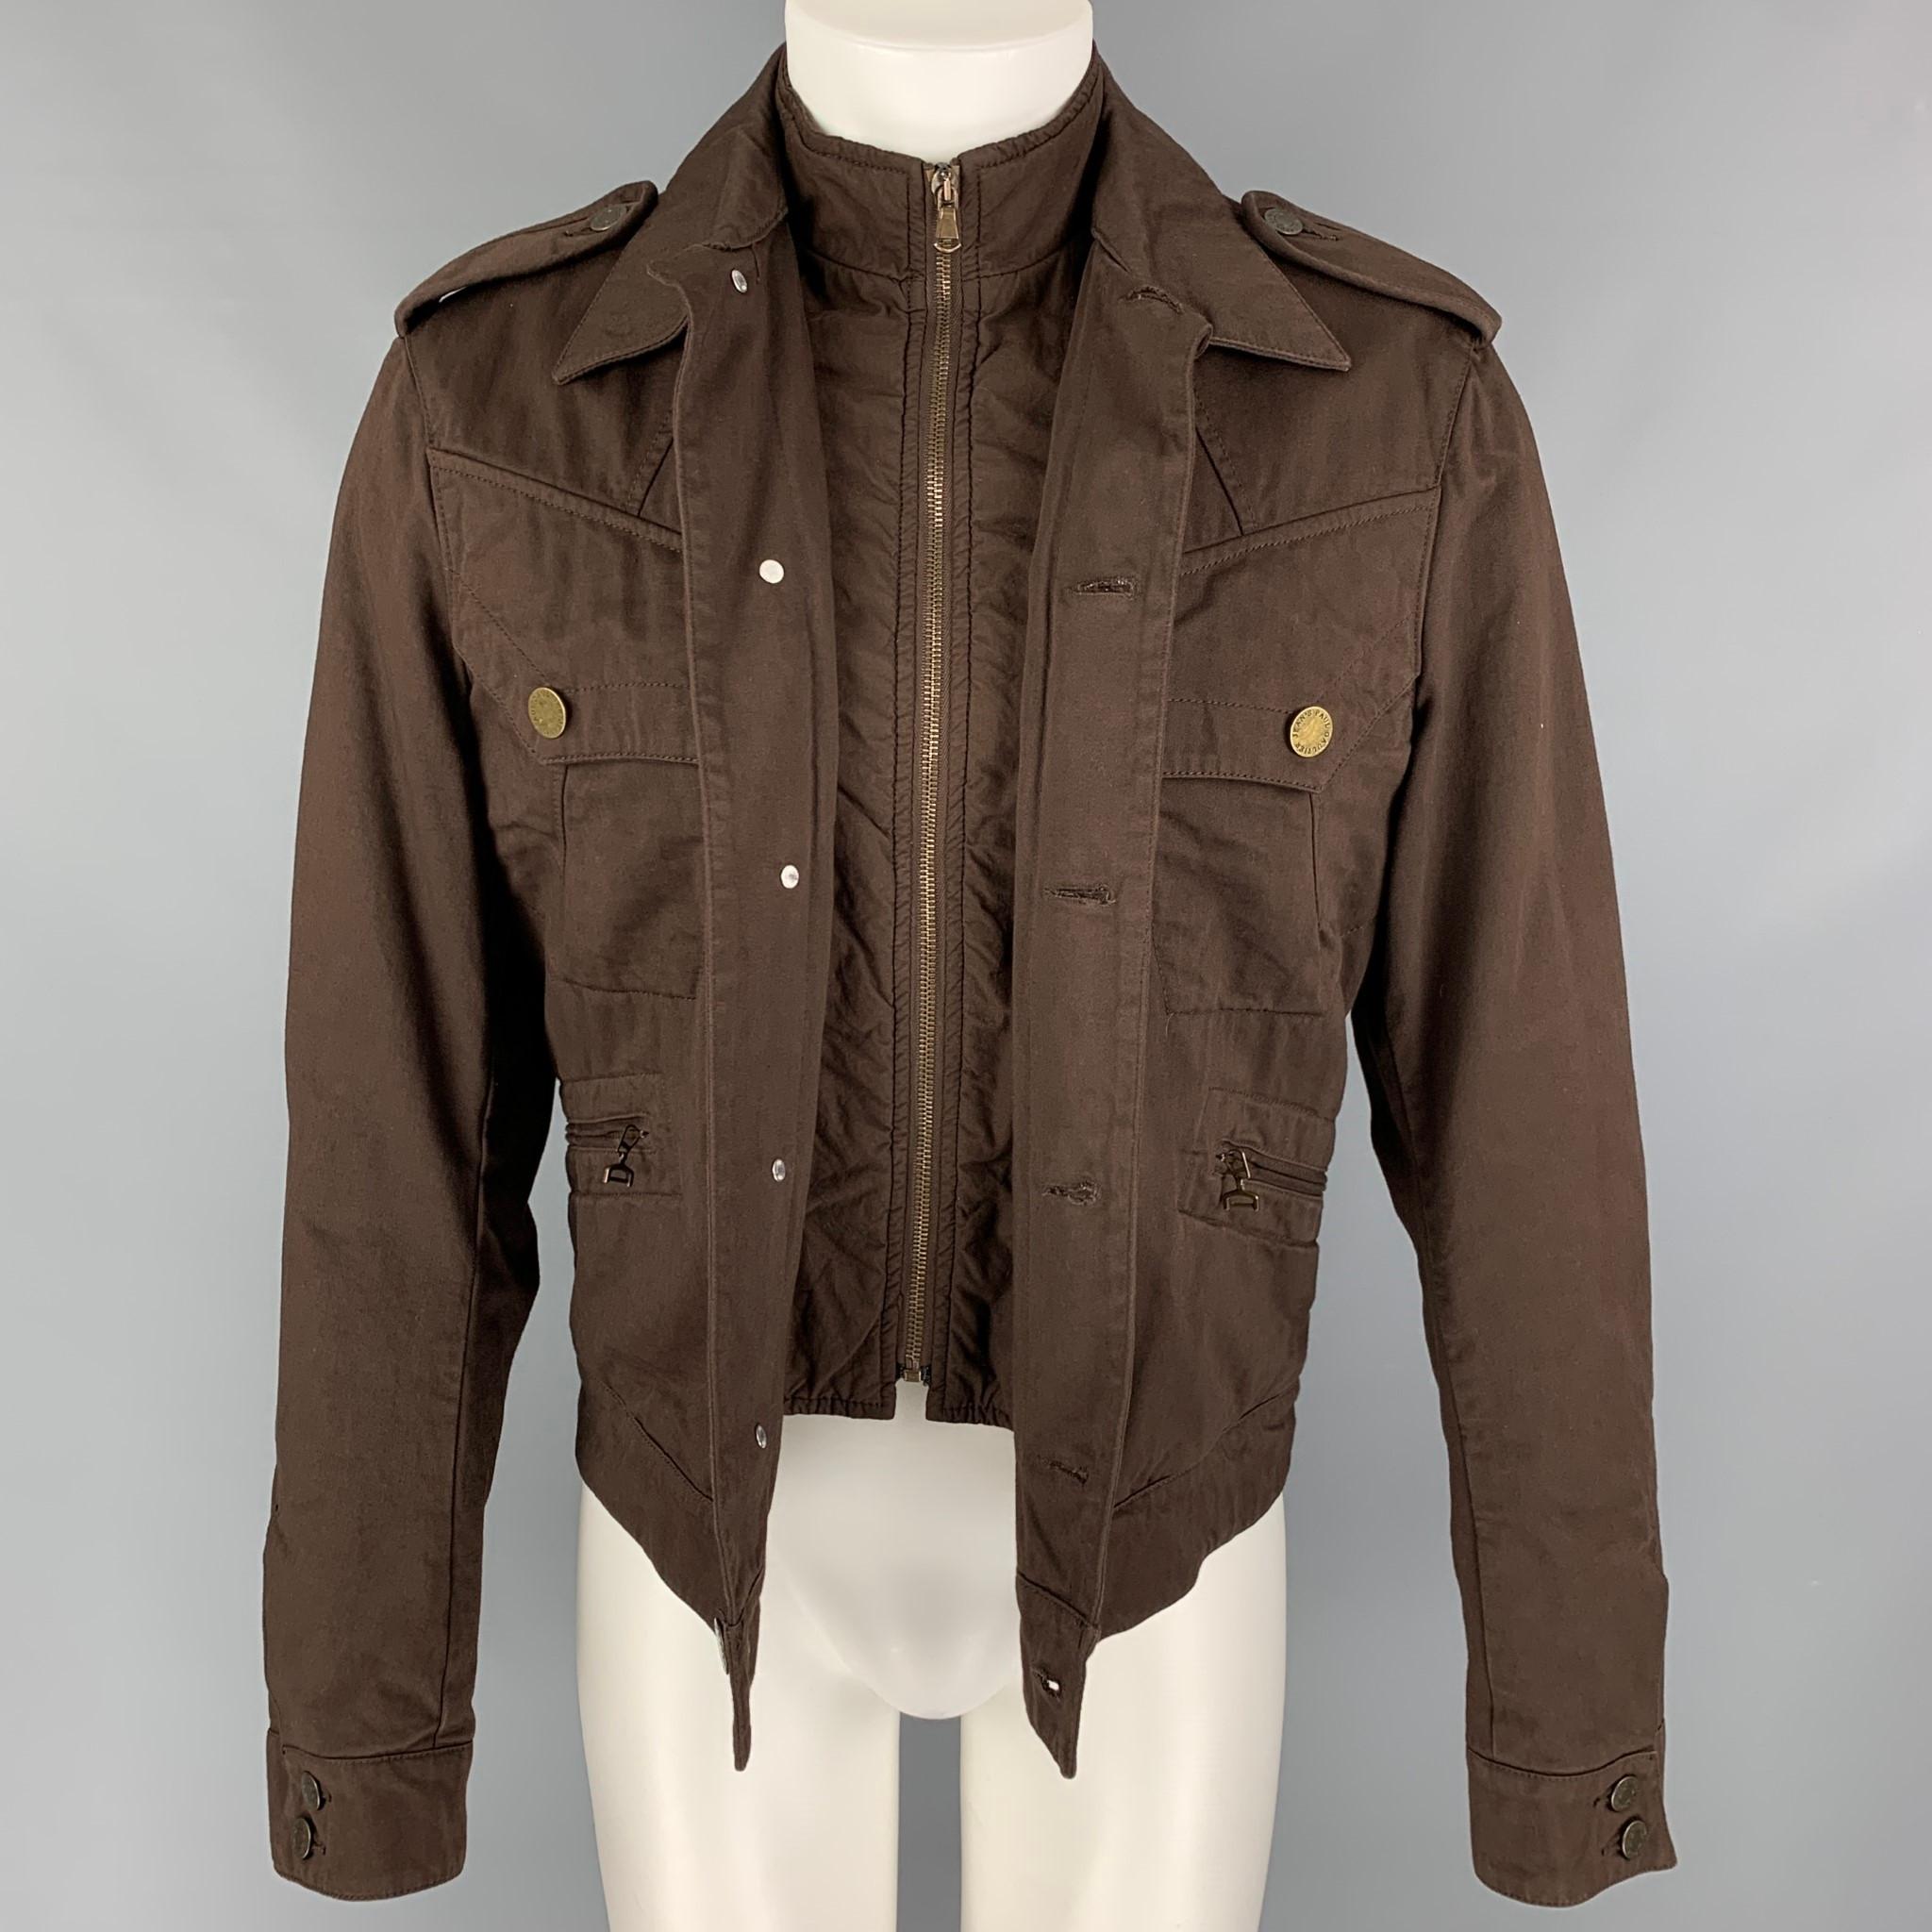 JEAN PAUL GAULTIER jacket comes in a brown material featuring a simulated vest, sailor back design, front pockets, epaulettes, zip up, and a buttoned closure. 

Very Good Pre-Owned Condition.
Marked: 50

Measurements:

Shoulder: 19 in.
Chest: 40